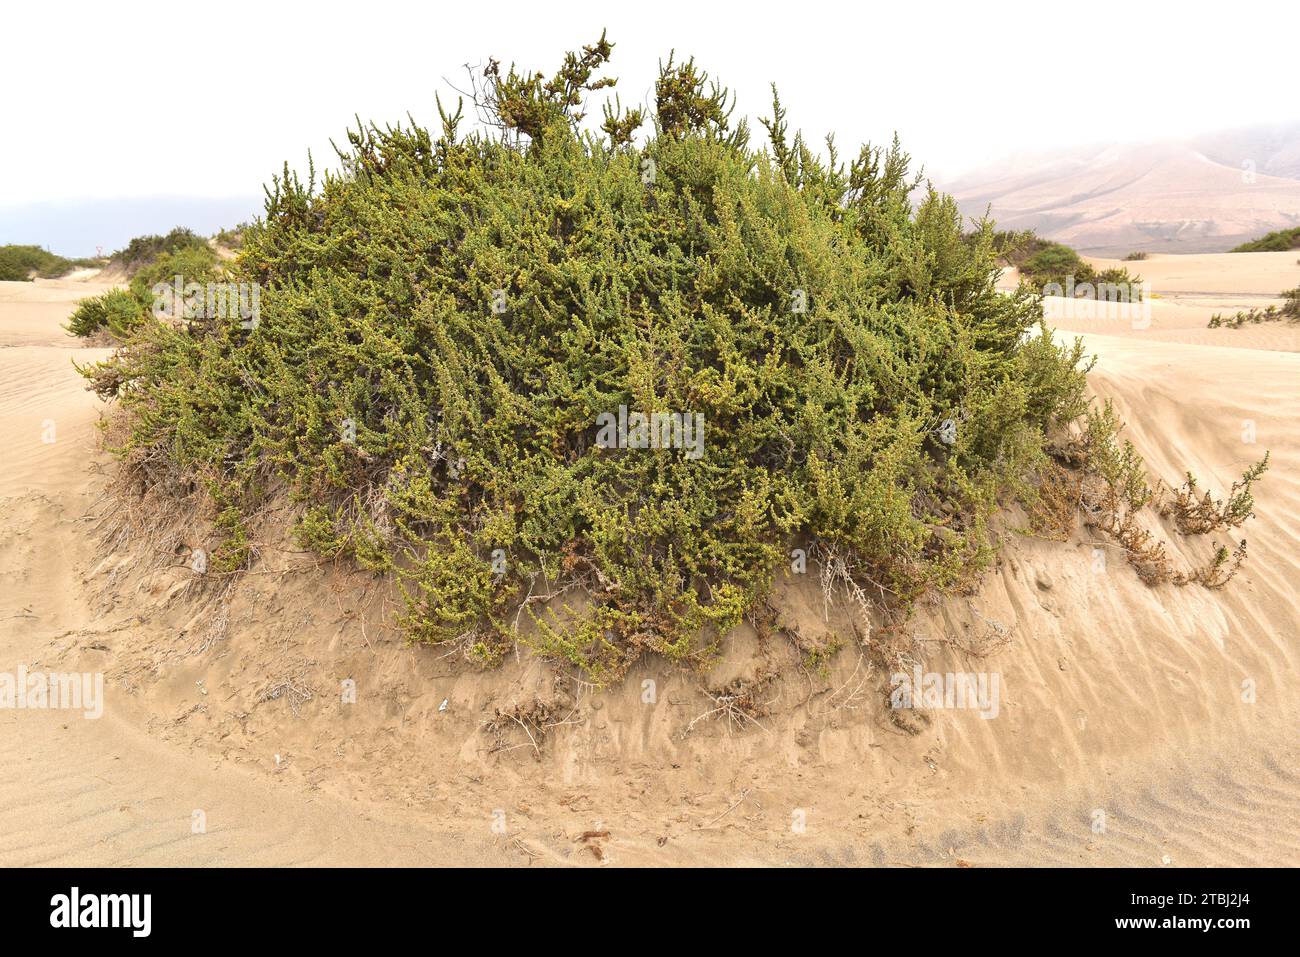 Traganum moquinii is an halophyte shrub native to northern Africa and Canary Islands. In Canary Islands is an endangered and protected species. This p Stock Photo